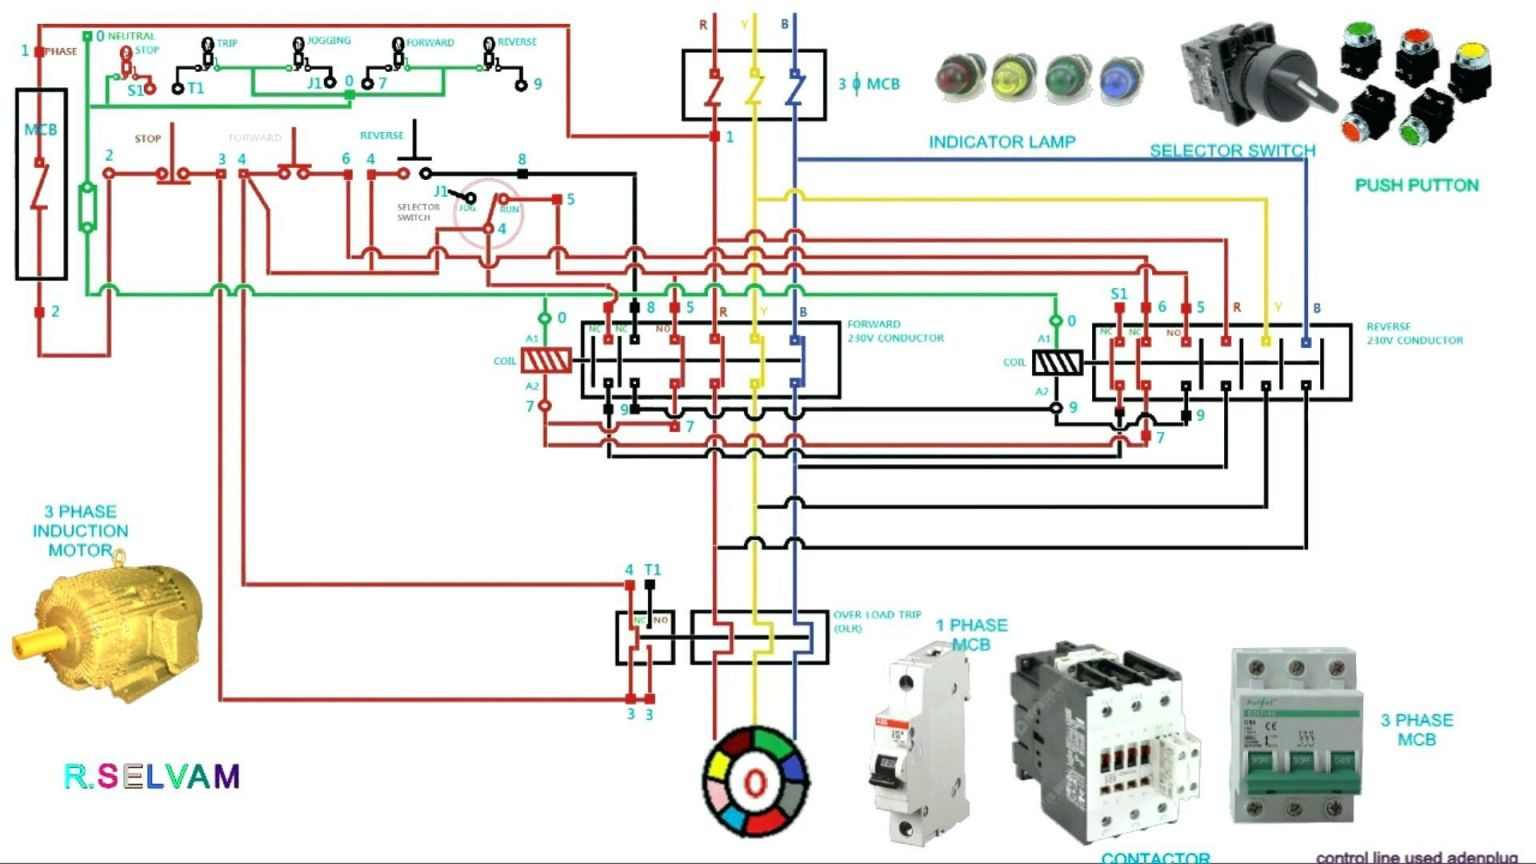 Luxury 3 Phase Contactor Wiring Diagram Start Stop - Wiring Diagram - 3 Phase Contactor Wiring Diagram Start Stop